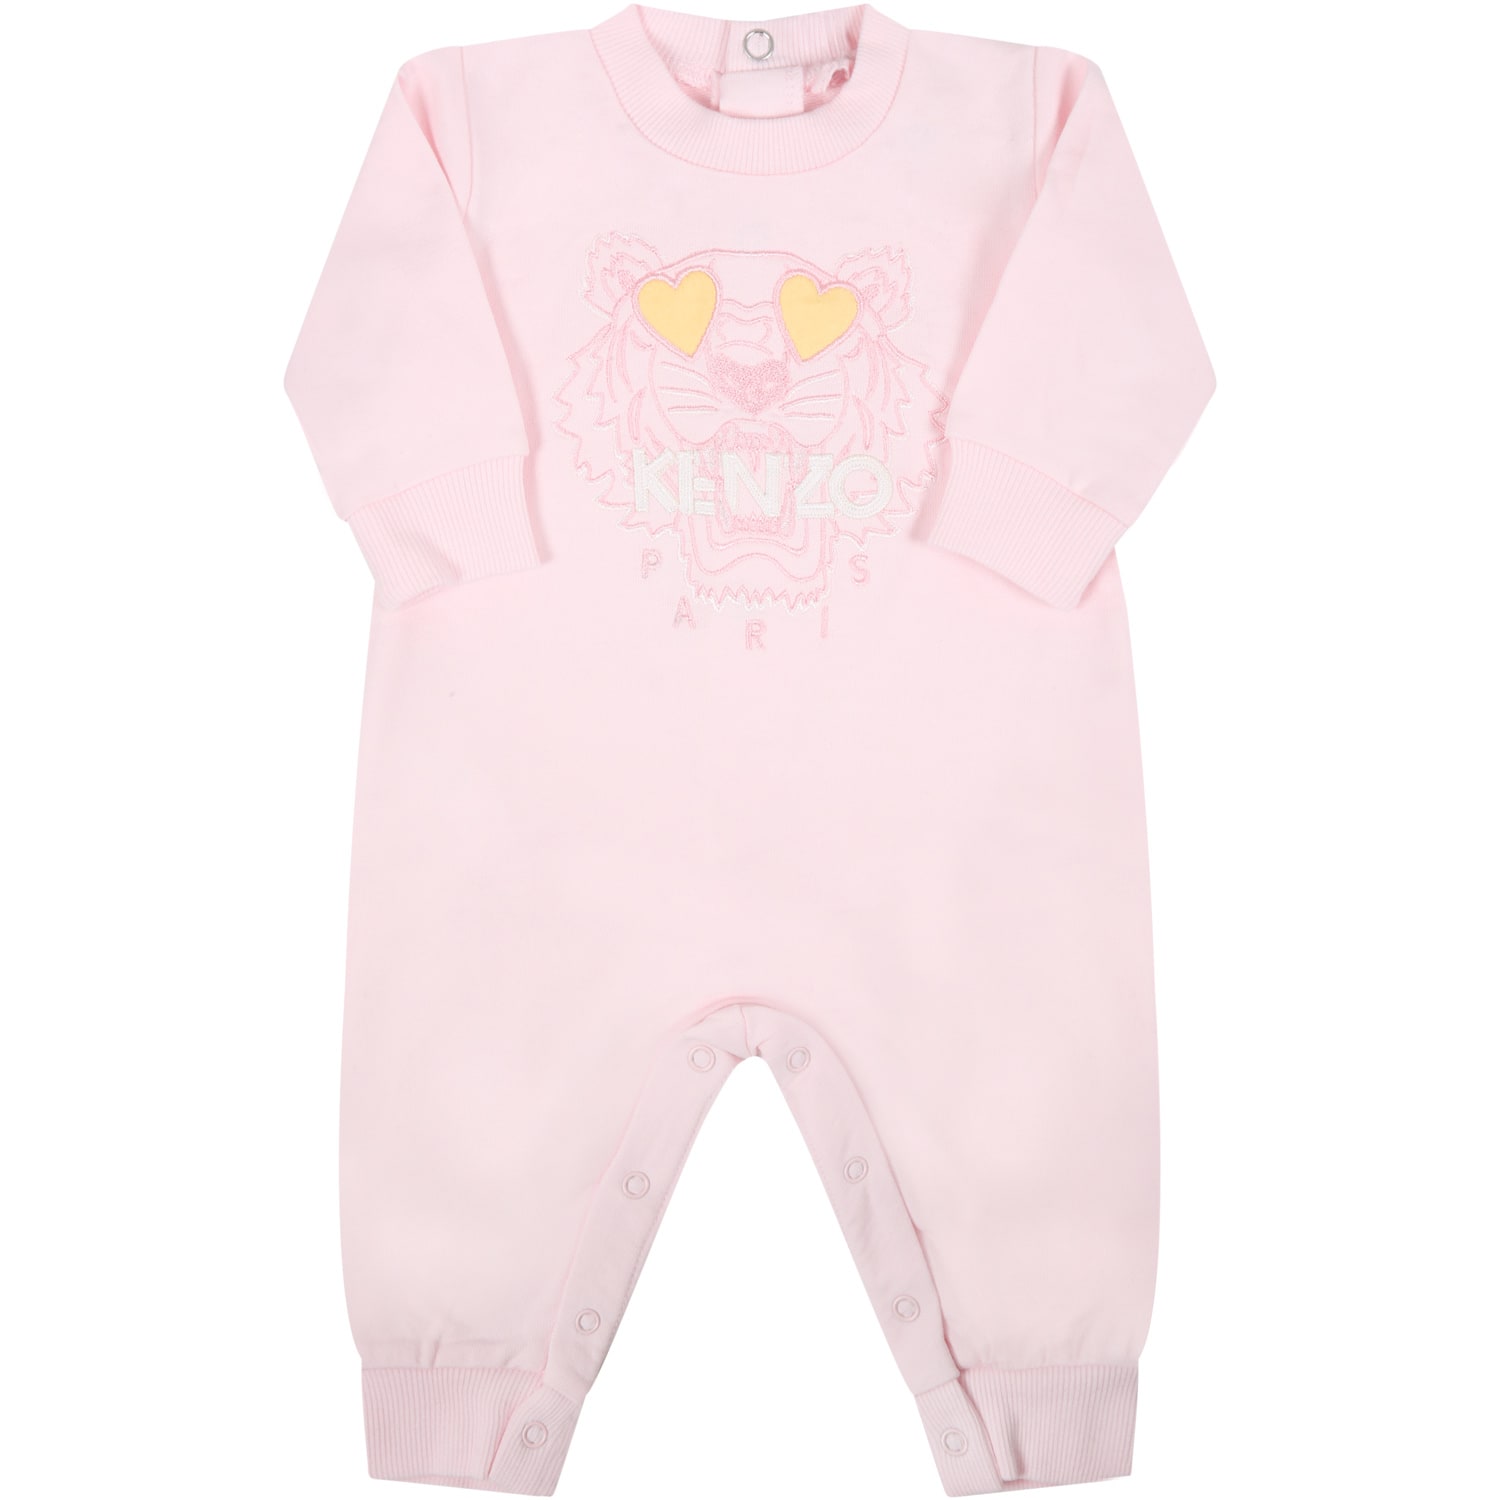 Kenzo Kids Pink Suit For Baby Girl With Iconic Tiger